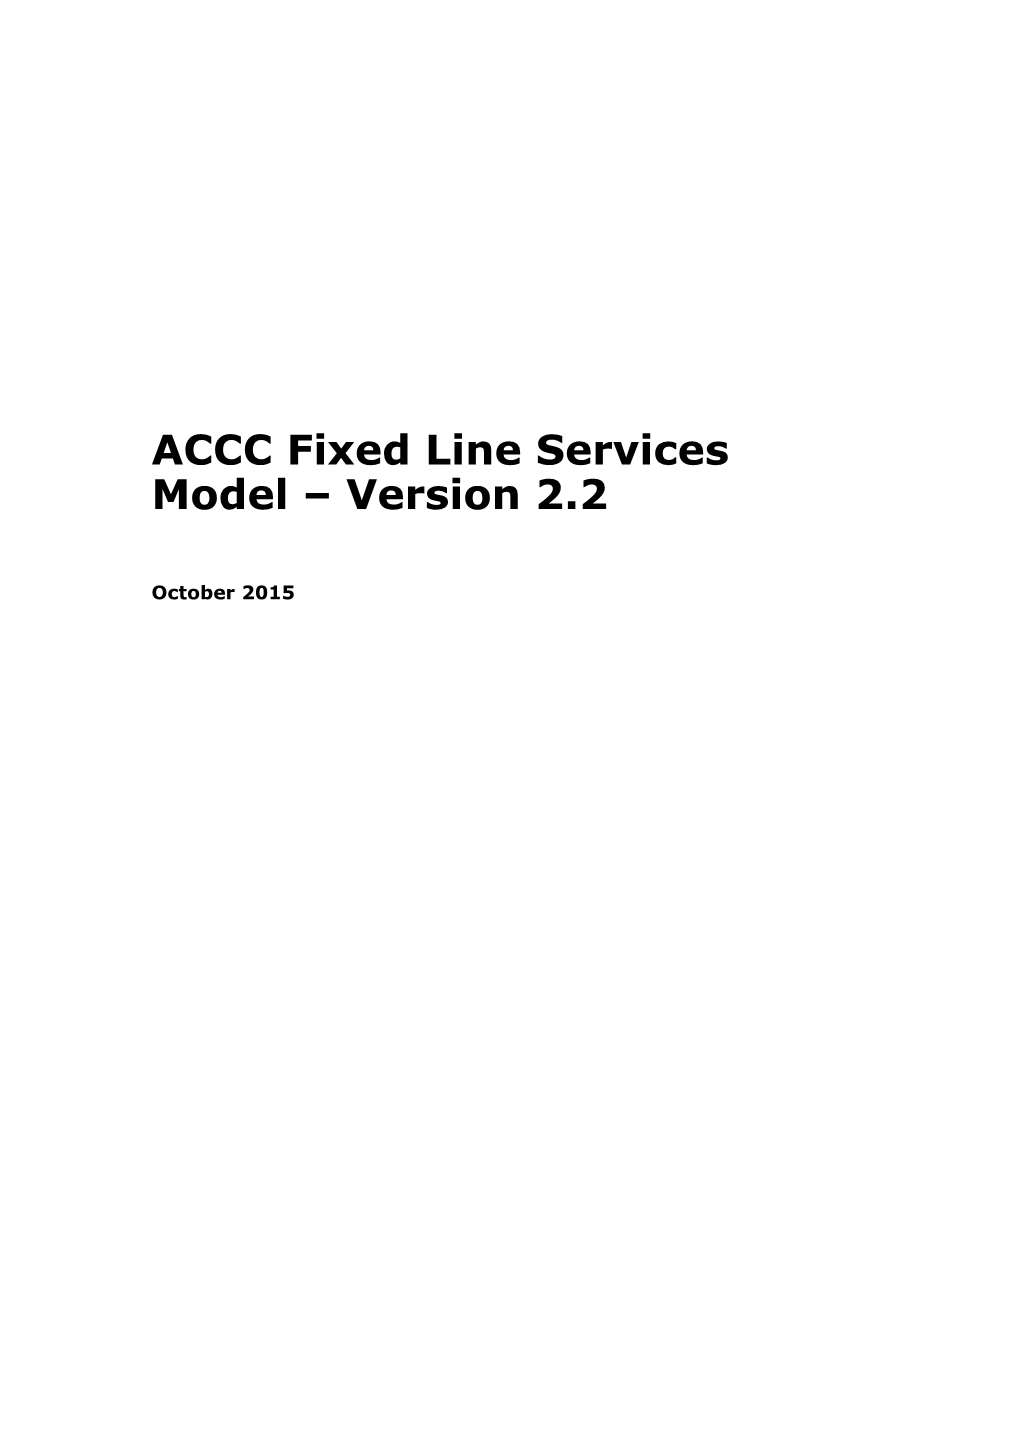 ACCC Fixed Line Services Model Version 2.2